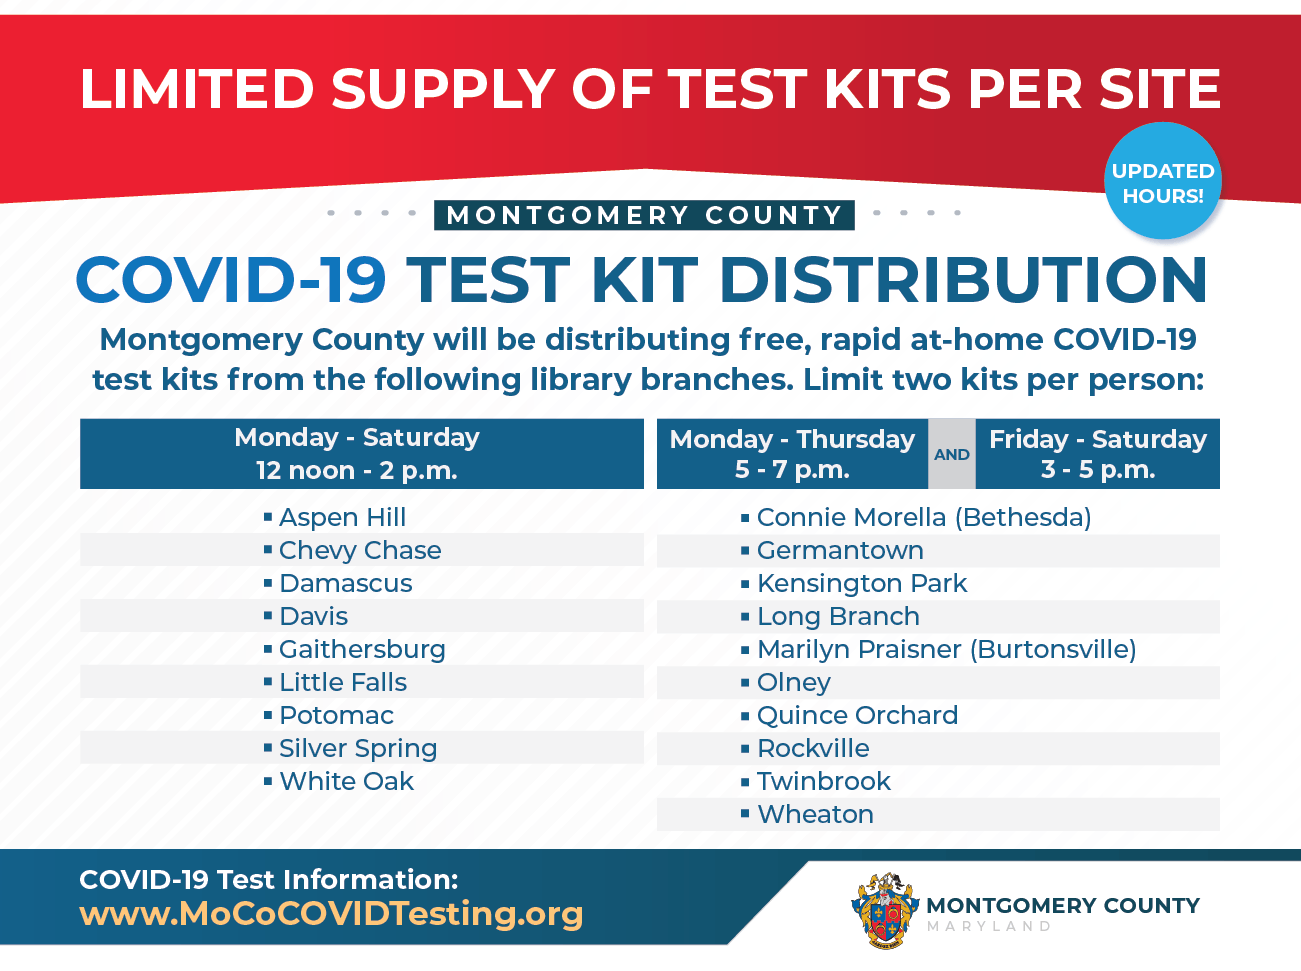 Covid-19 test kit distribution montgomery county will be distributing free, rapid at-home covid-19 test kits for residents only. limit two kits per person.